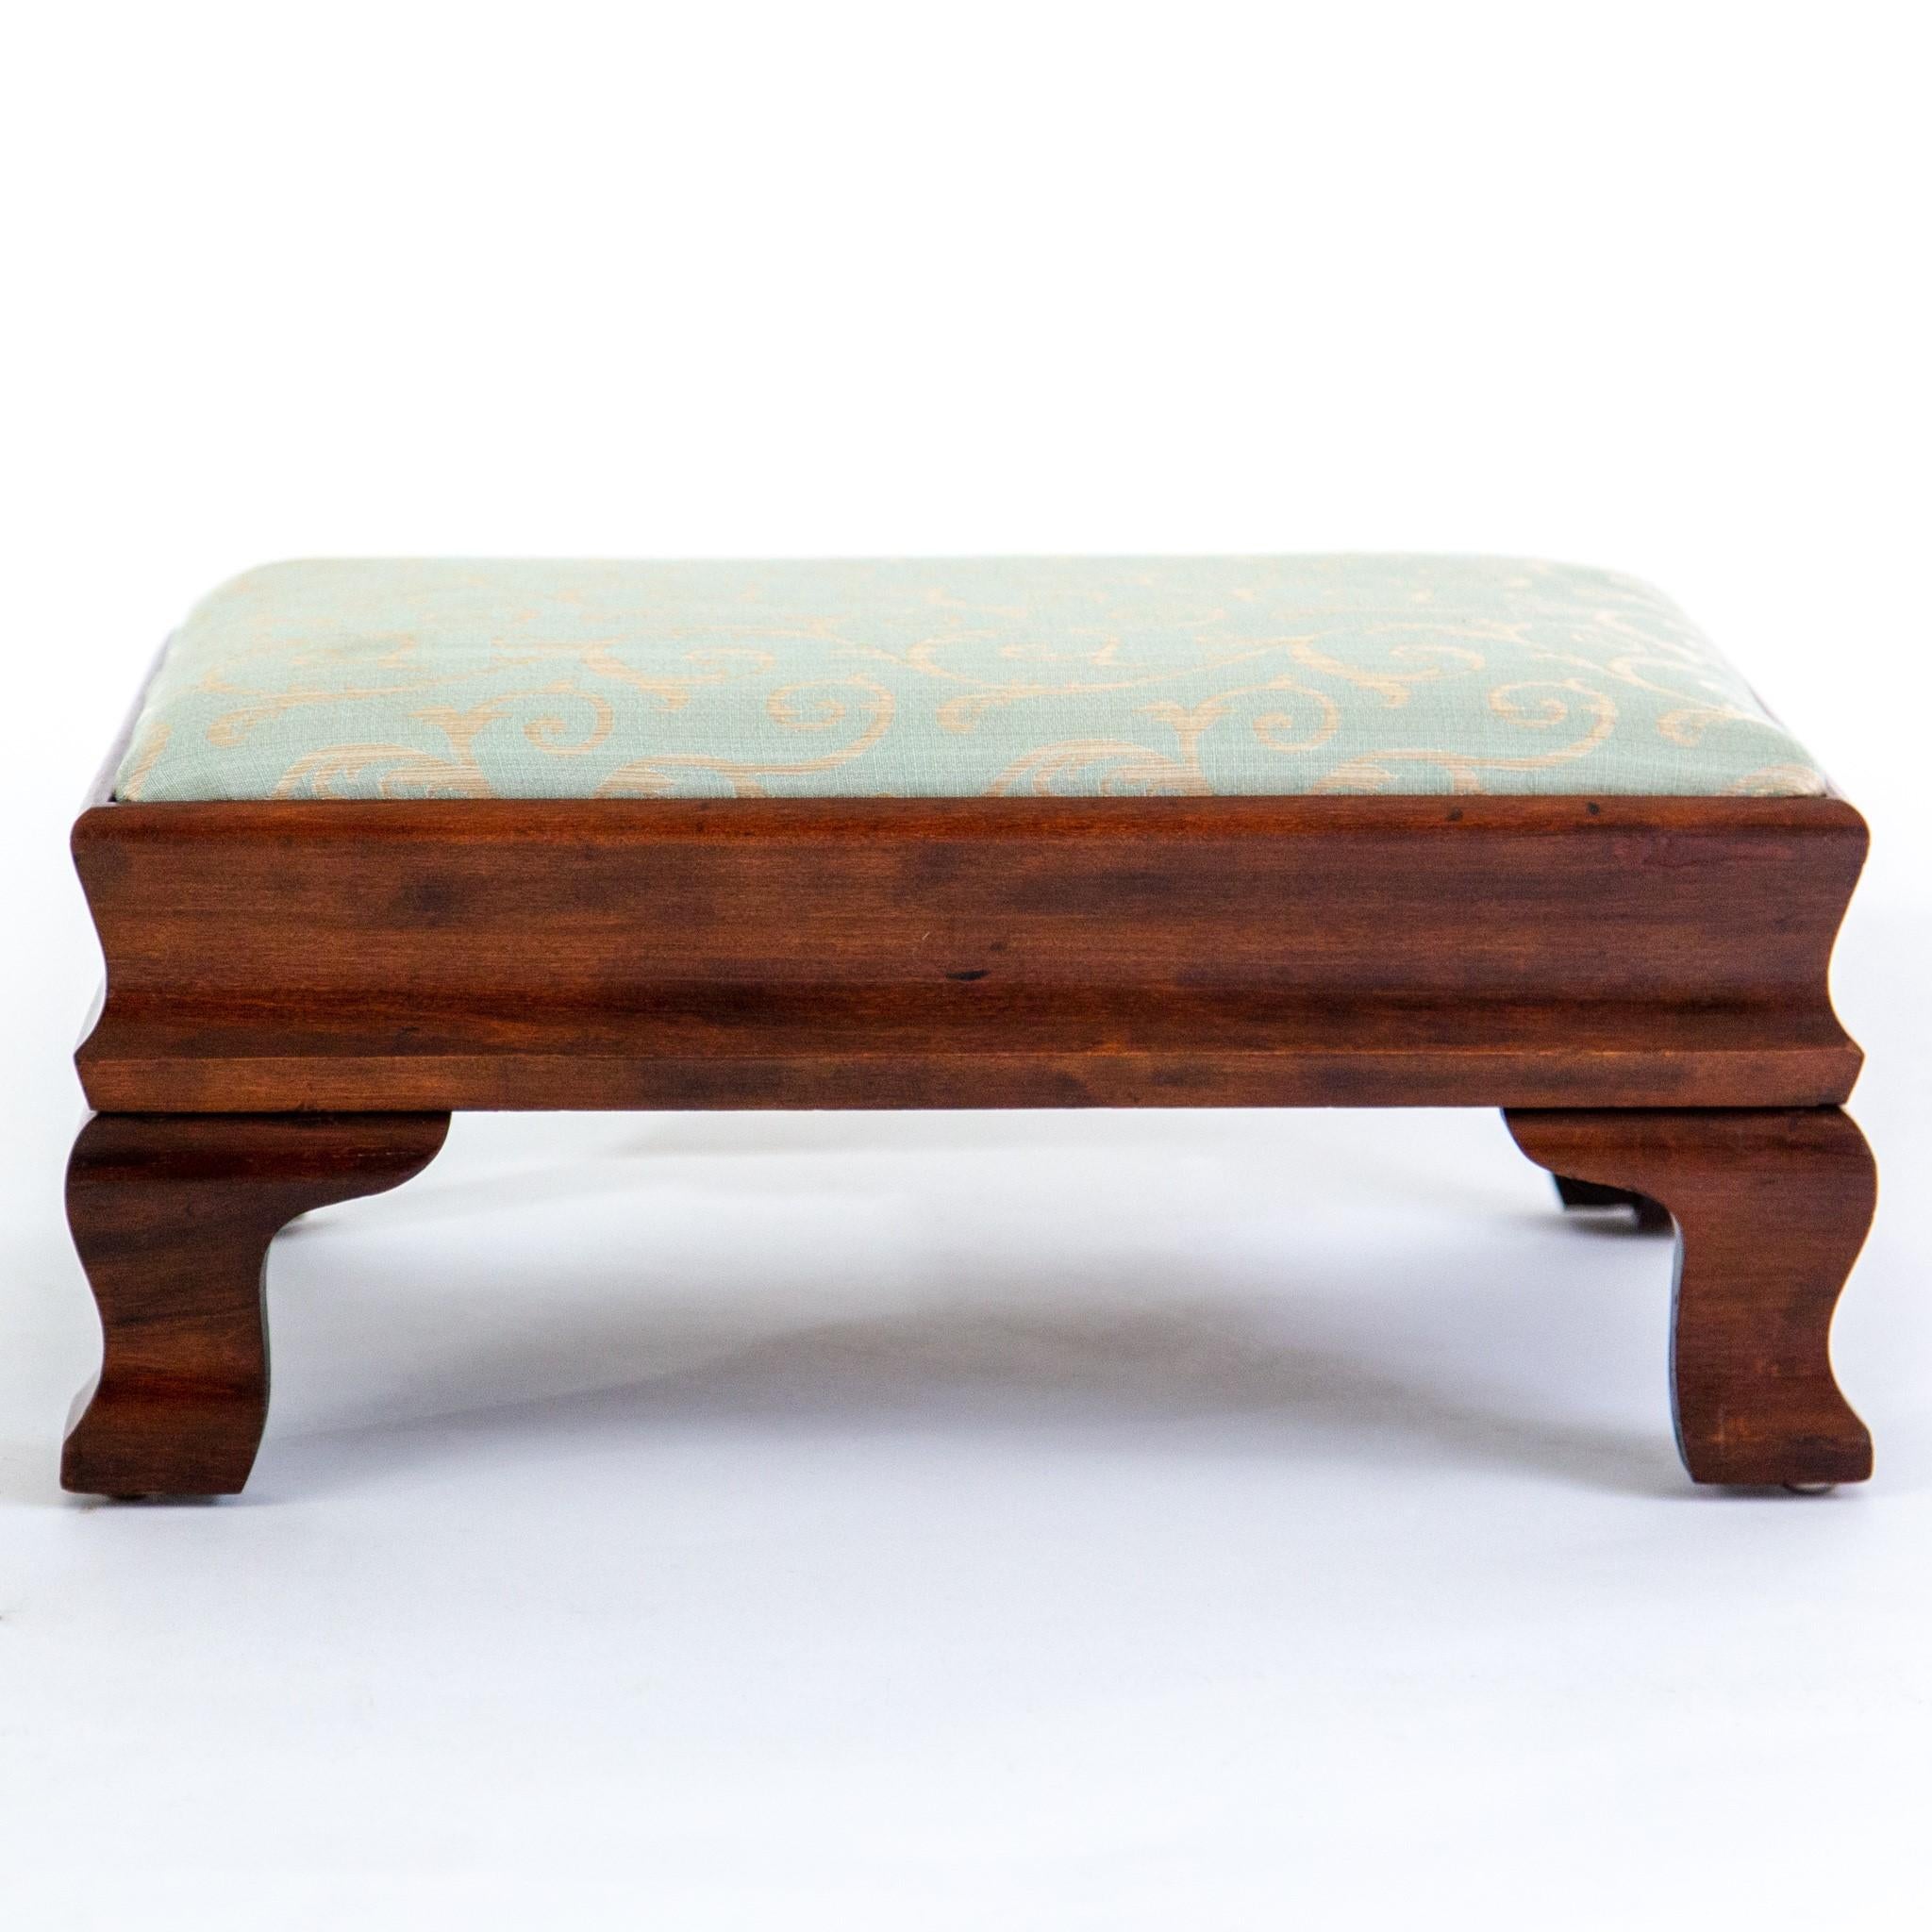 Walnut Footstool with Bracket Feet and Green Upholstery 2